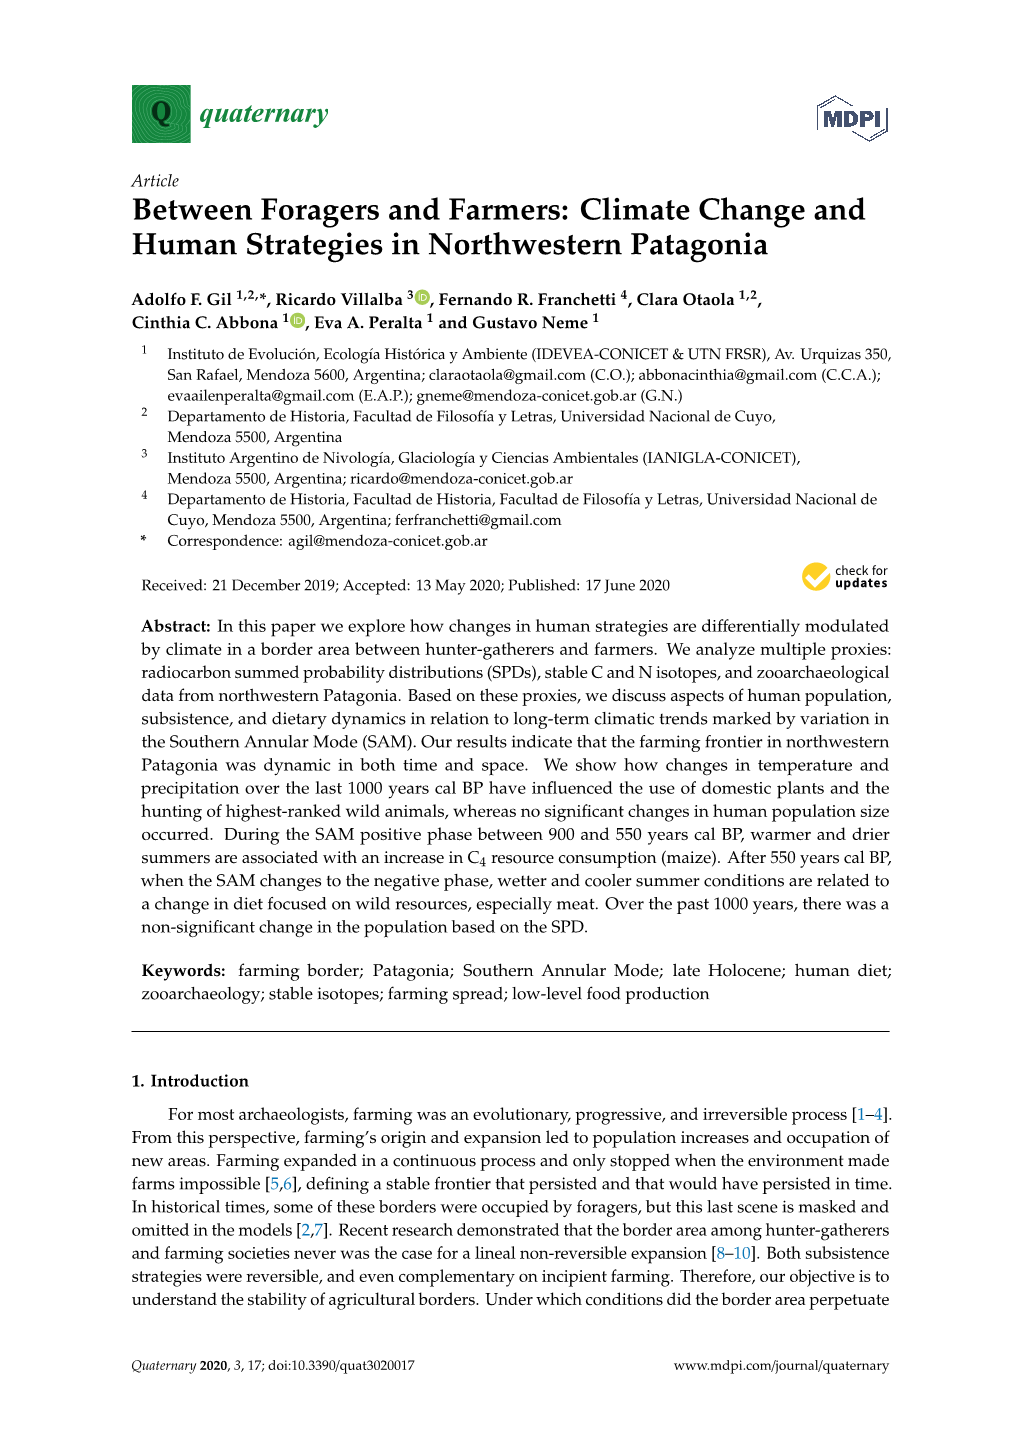 Between Foragers and Farmers: Climate Change and Human Strategies in Northwestern Patagonia